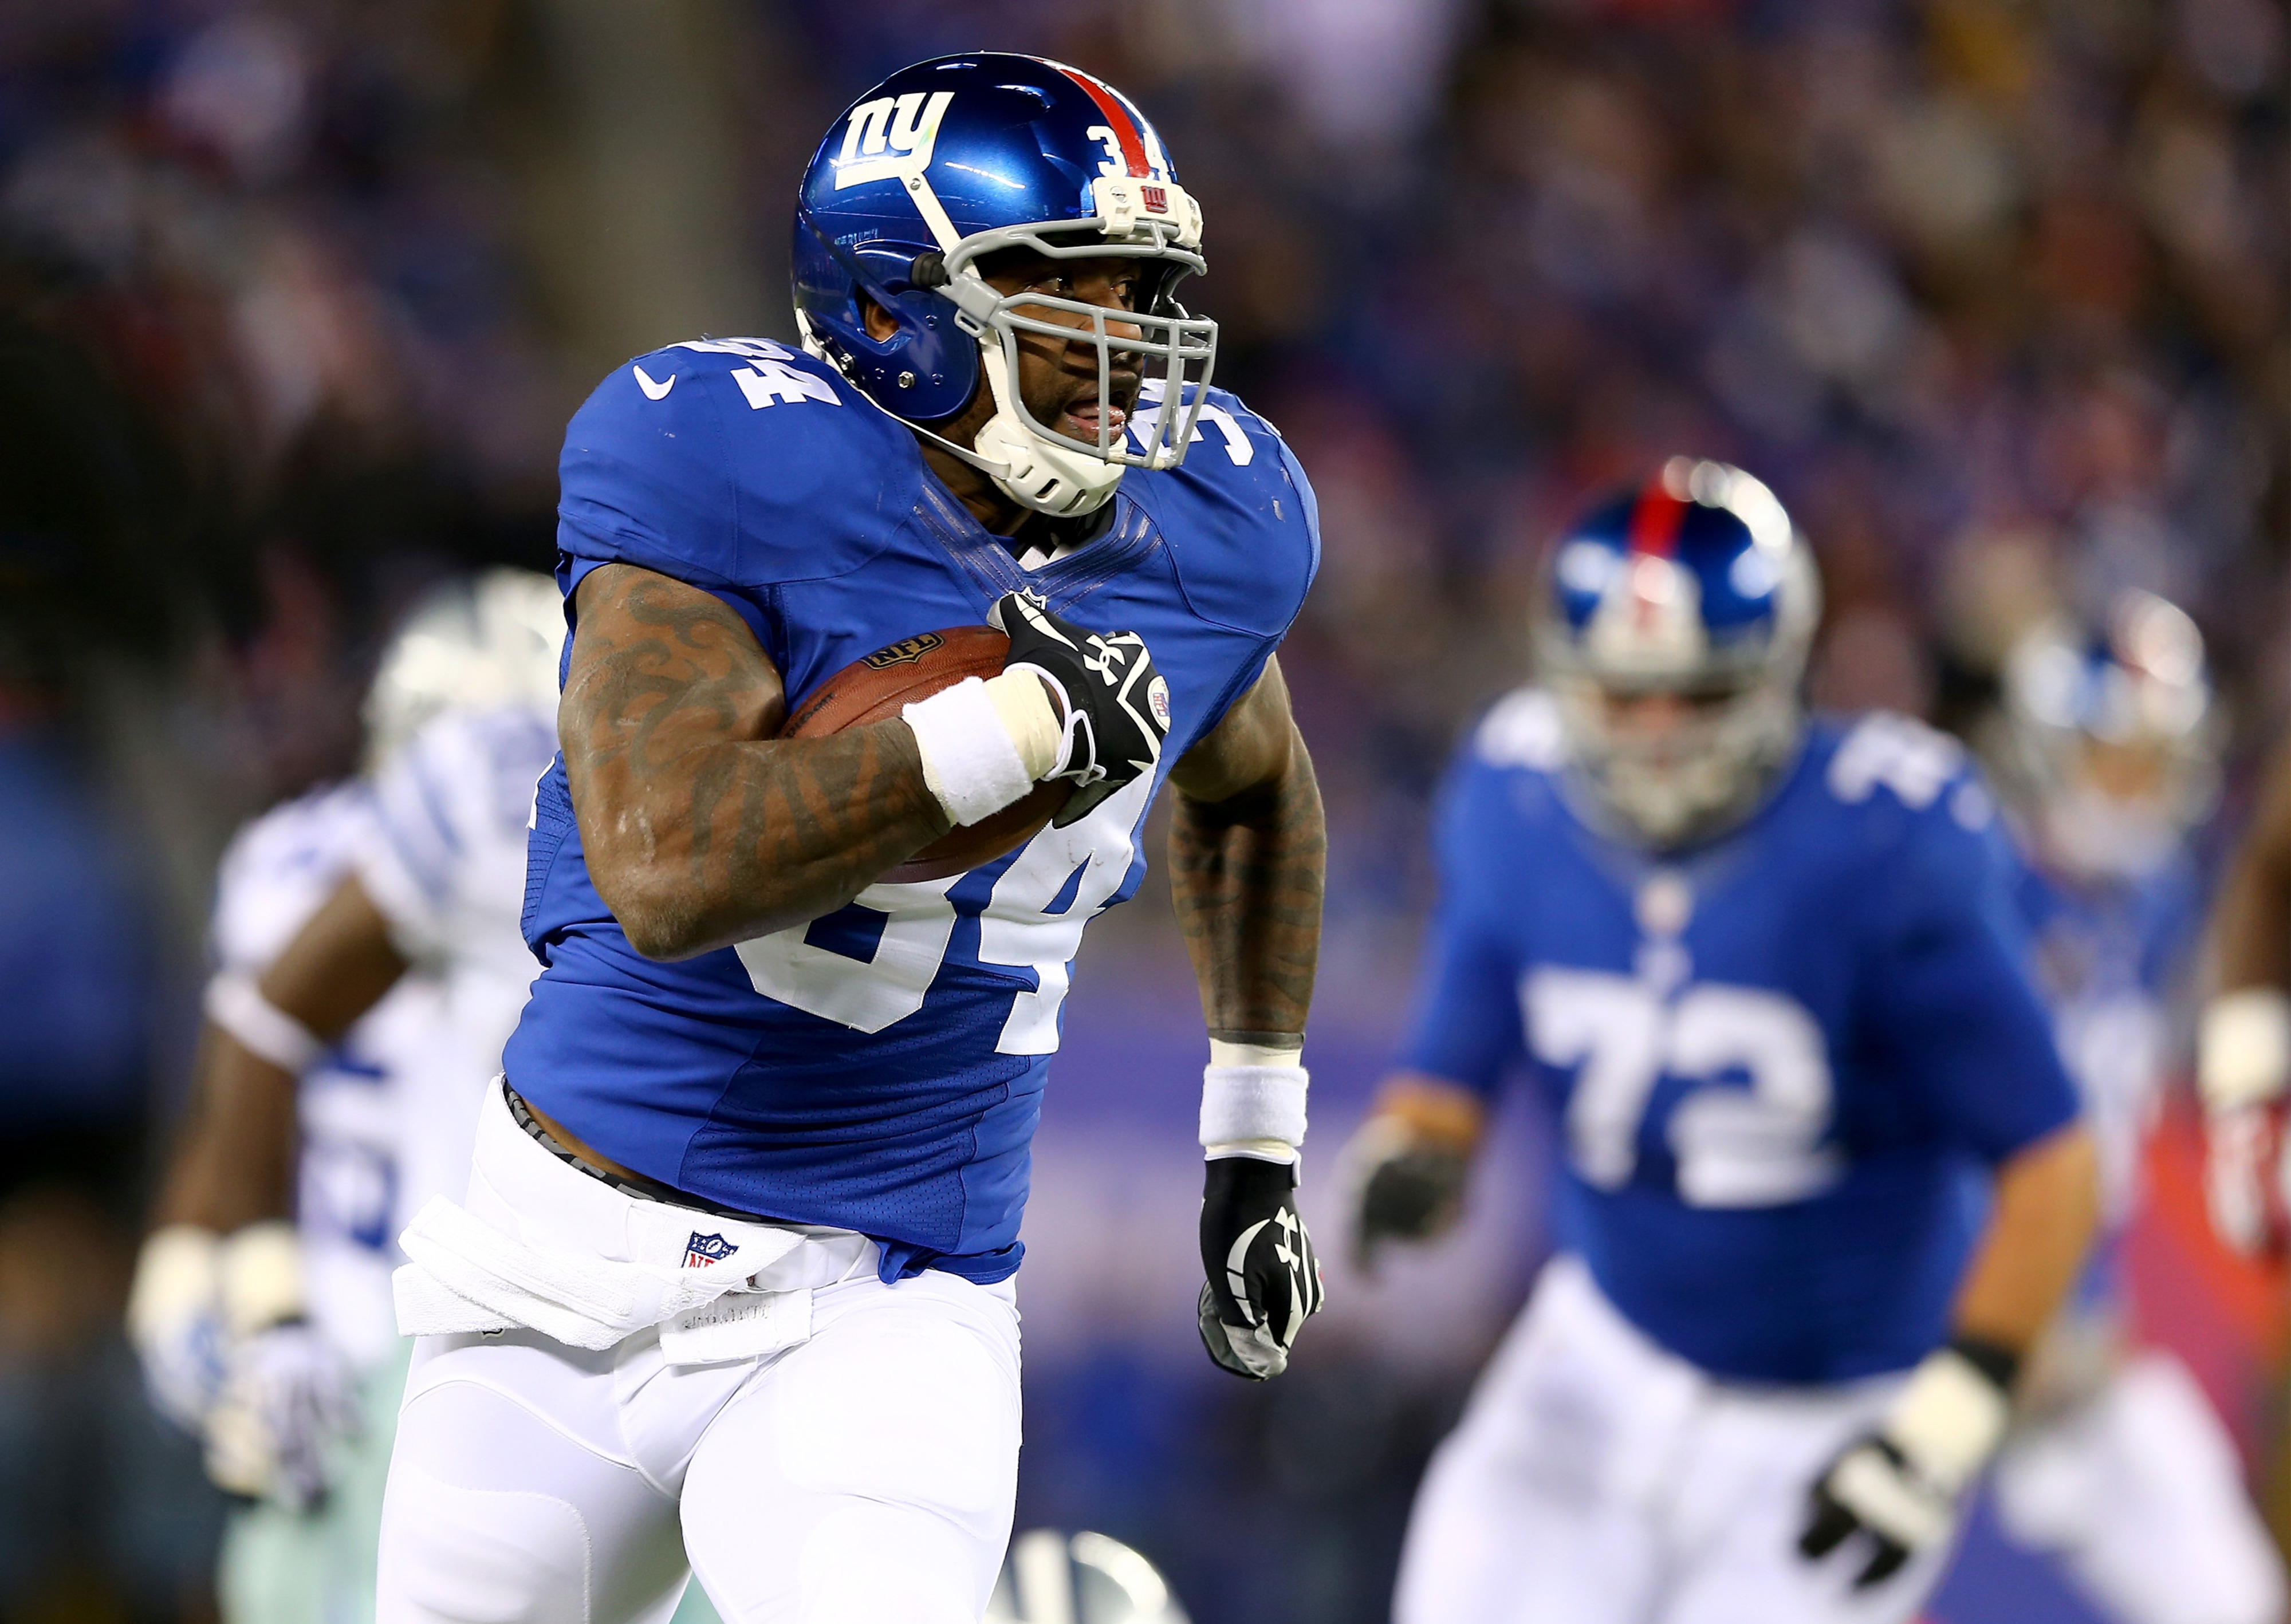 Brandon Jacobs is inactive Sunday for the Giants